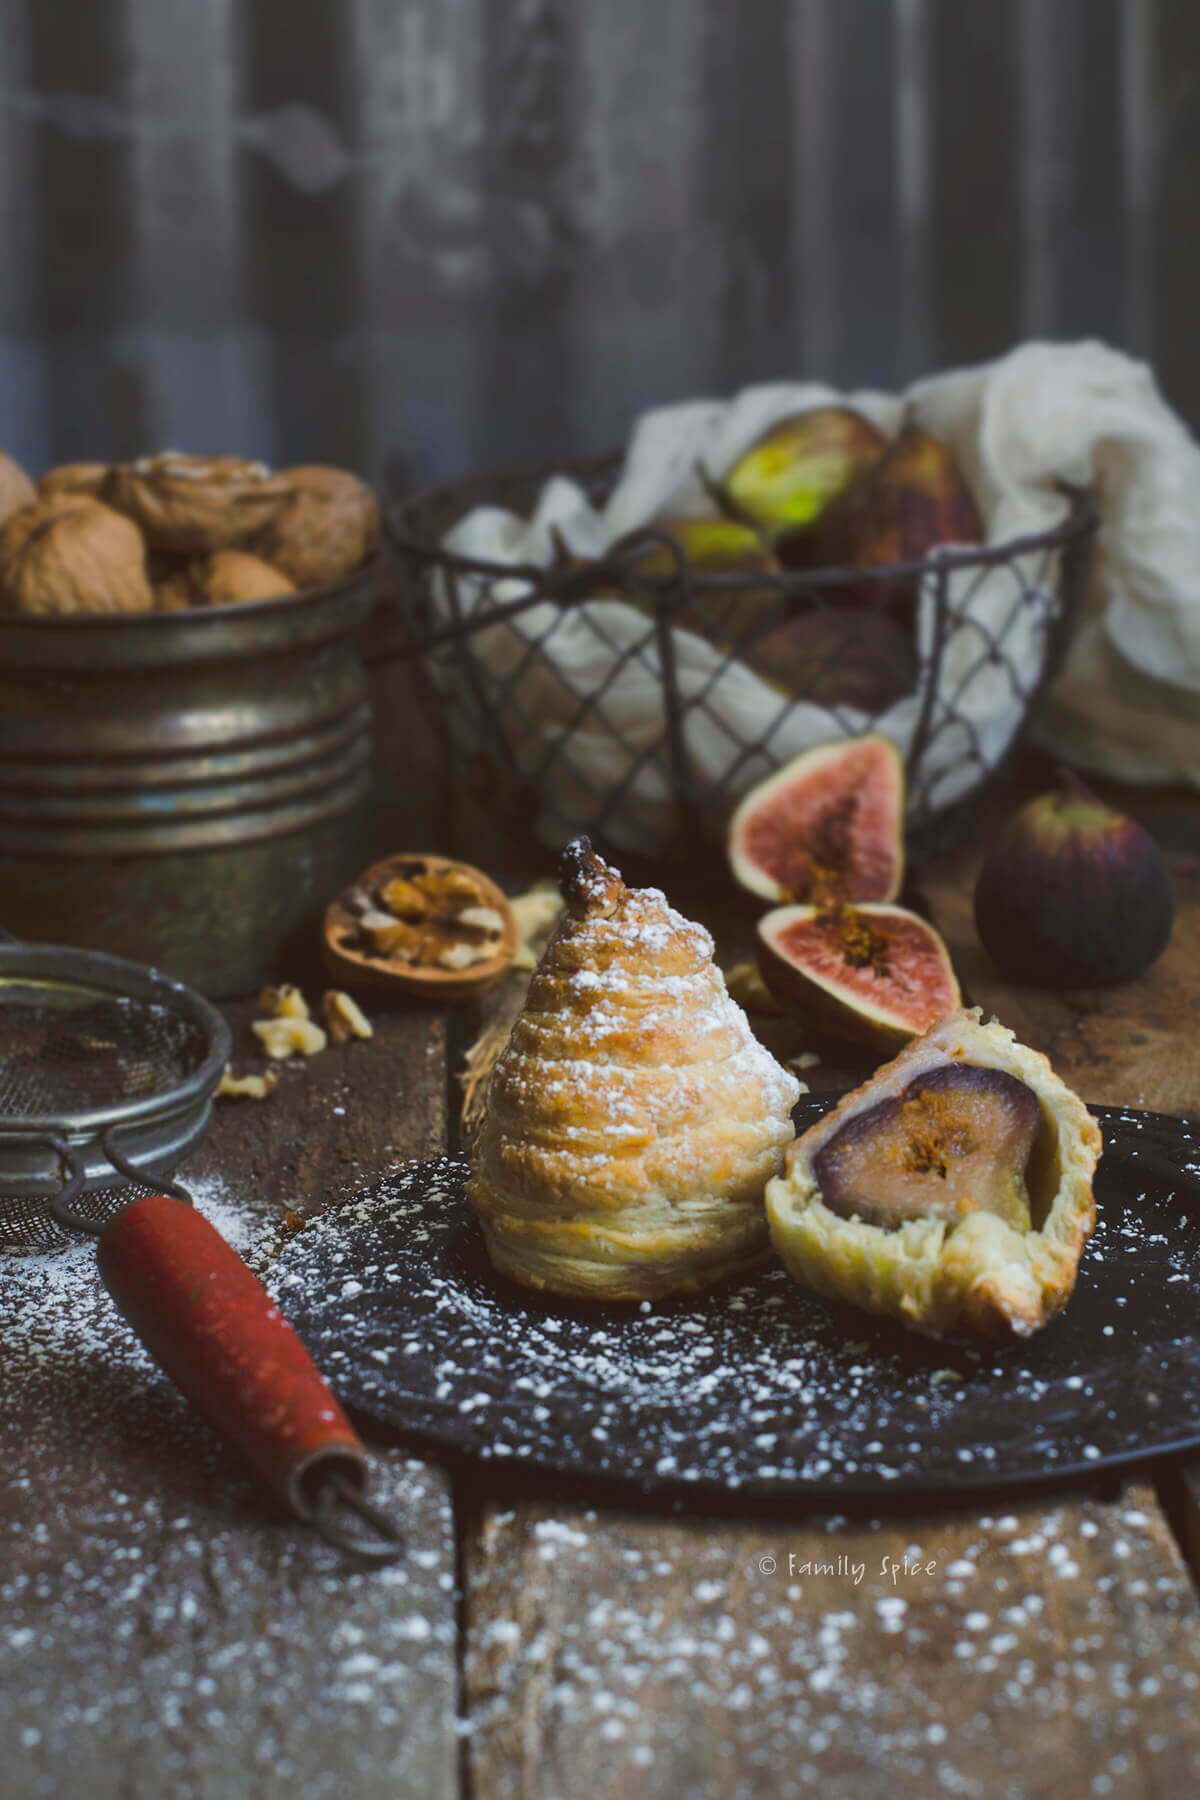 Figs baked in puff pastry and dusted with powdered sugar